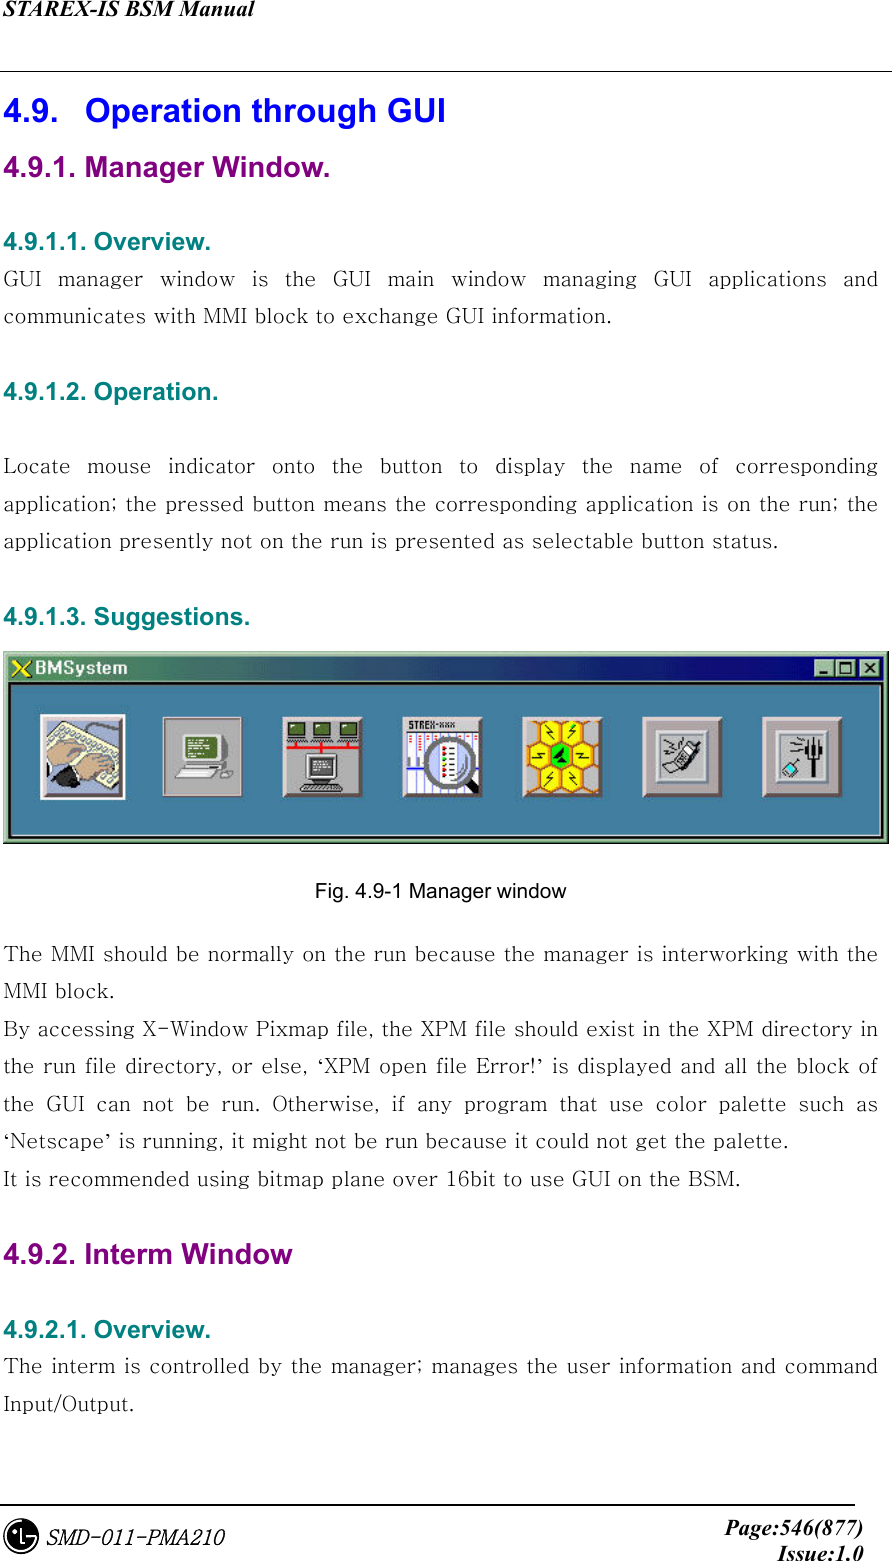 STAREX-IS BSM Manual     Page:546(877)Issue:1.0SMD-011-PMA210 4.9.   Operation through GUI 4.9.1. Manager Window.  4.9.1.1. Overview. GUI  manager  window  is  the  GUI  main window managing GUI applications  and communicates with MMI block to exchange GUI information.  4.9.1.2. Operation.  Locate mouse indicator onto the button to display the name of corresponding application; the pressed button means the corresponding application is on the run; the application presently not on the run is presented as selectable button status.  4.9.1.3. Suggestions.  Fig. 4.9-1 Manager window The MMI should be normally on the run because the manager is interworking with the MMI block. By accessing X-Window Pixmap file, the XPM file should exist in the XPM directory in the run file directory, or else, ‘XPM open file Error!’ is displayed and all the block of the GUI can not be run. Otherwise, if any program that use color  palette  such  as ‘Netscape’ is running, it might not be run because it could not get the palette.   It is recommended using bitmap plane over 16bit to use GUI on the BSM.  4.9.2. Interm Window  4.9.2.1. Overview. The interm is controlled by the manager; manages the user information and command Input/Output.  